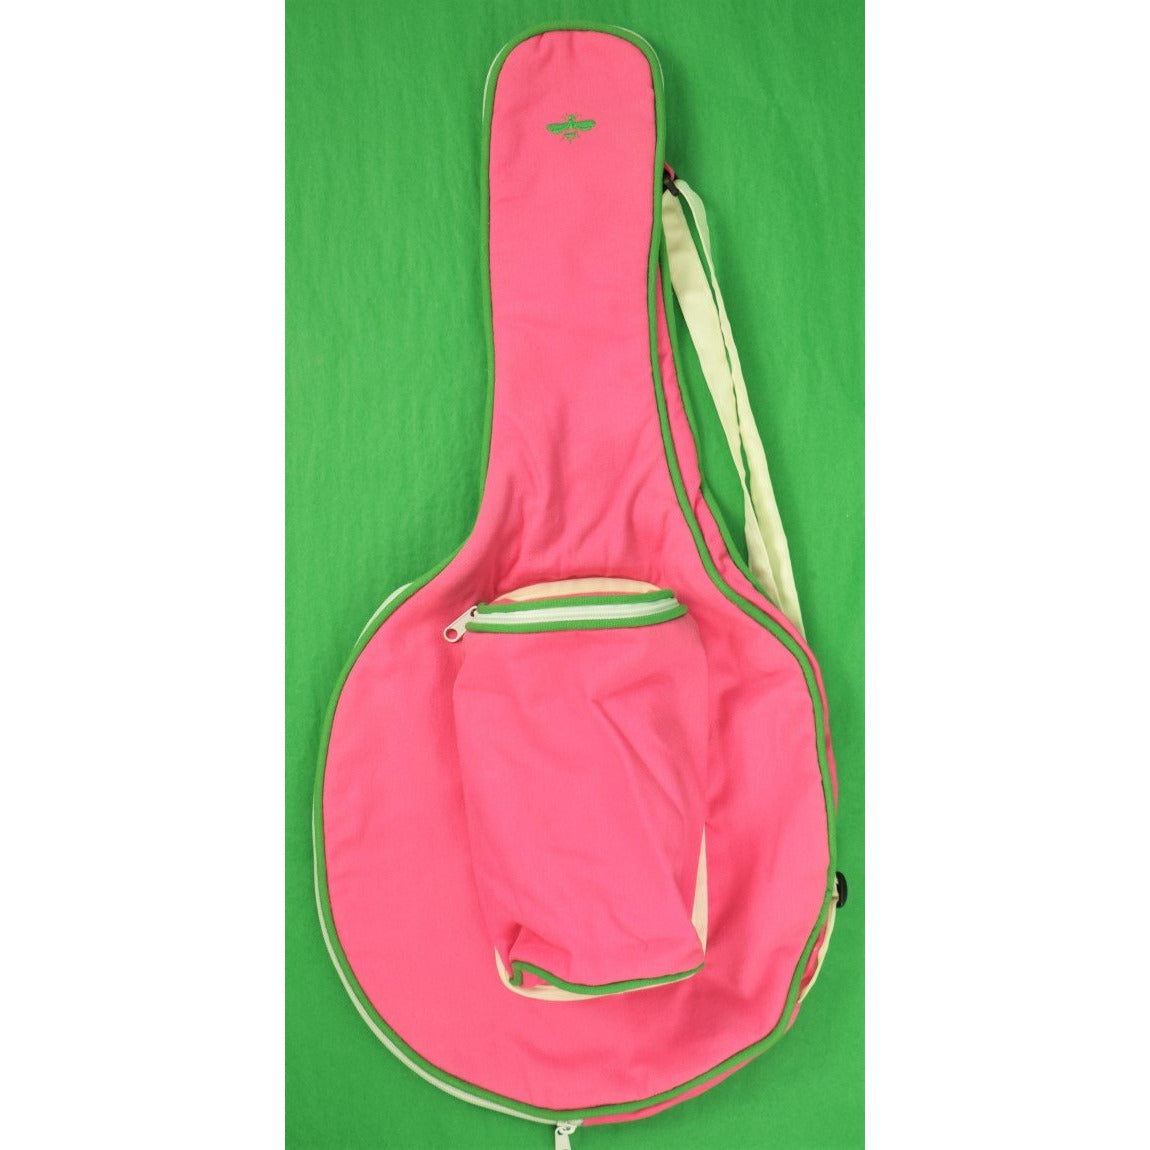 Wasp Bumblebee 1960's Pink & Lime Green Tennis Racquet Cover